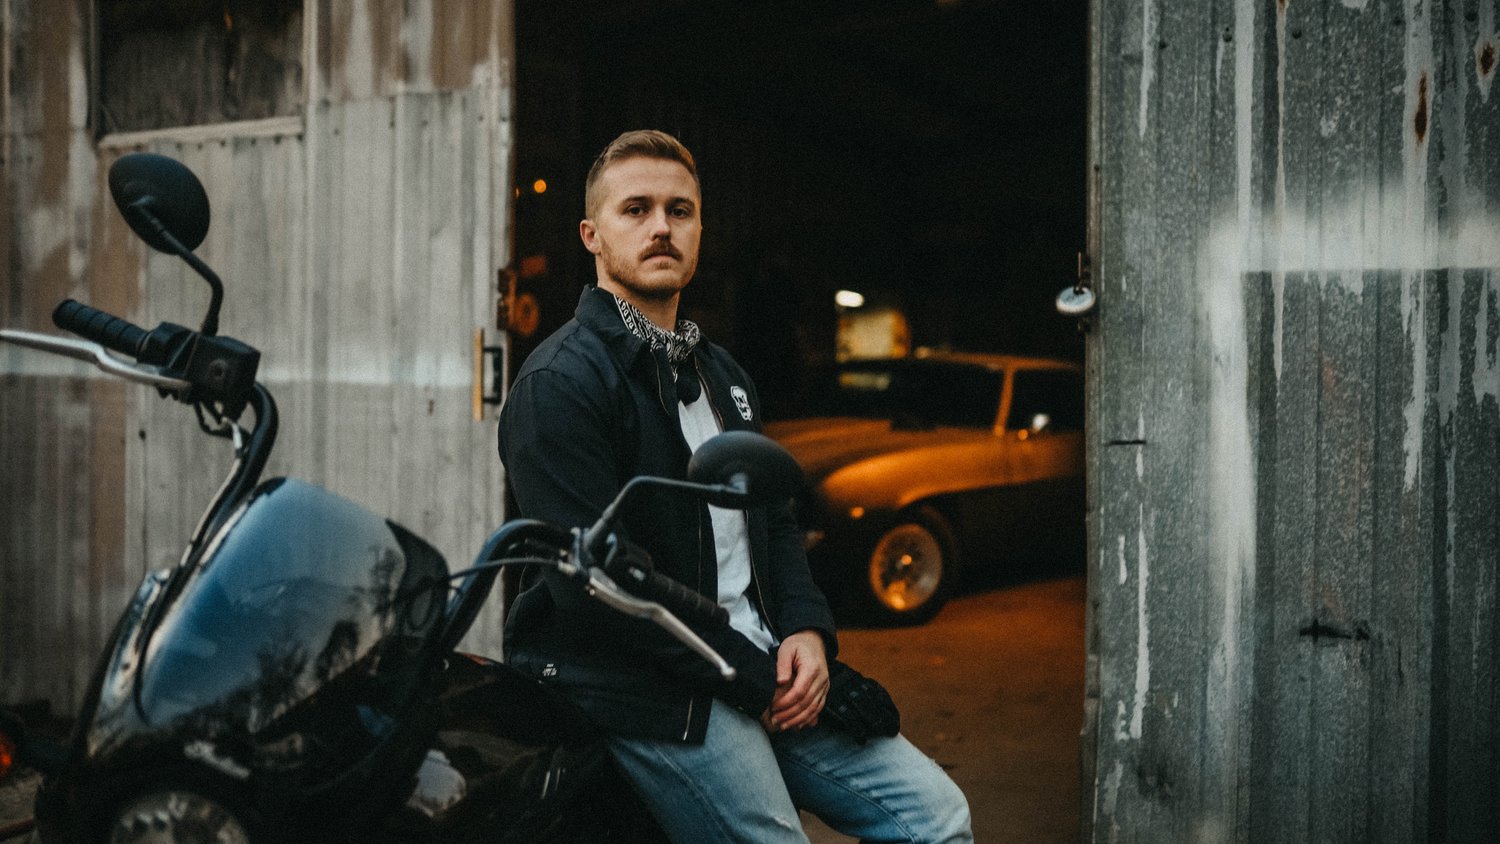 <h1 class="tribe-events-single-event-title">Saunders County Fair Concert featuring Corey Kent and Special Guest Logan Mize</h1>